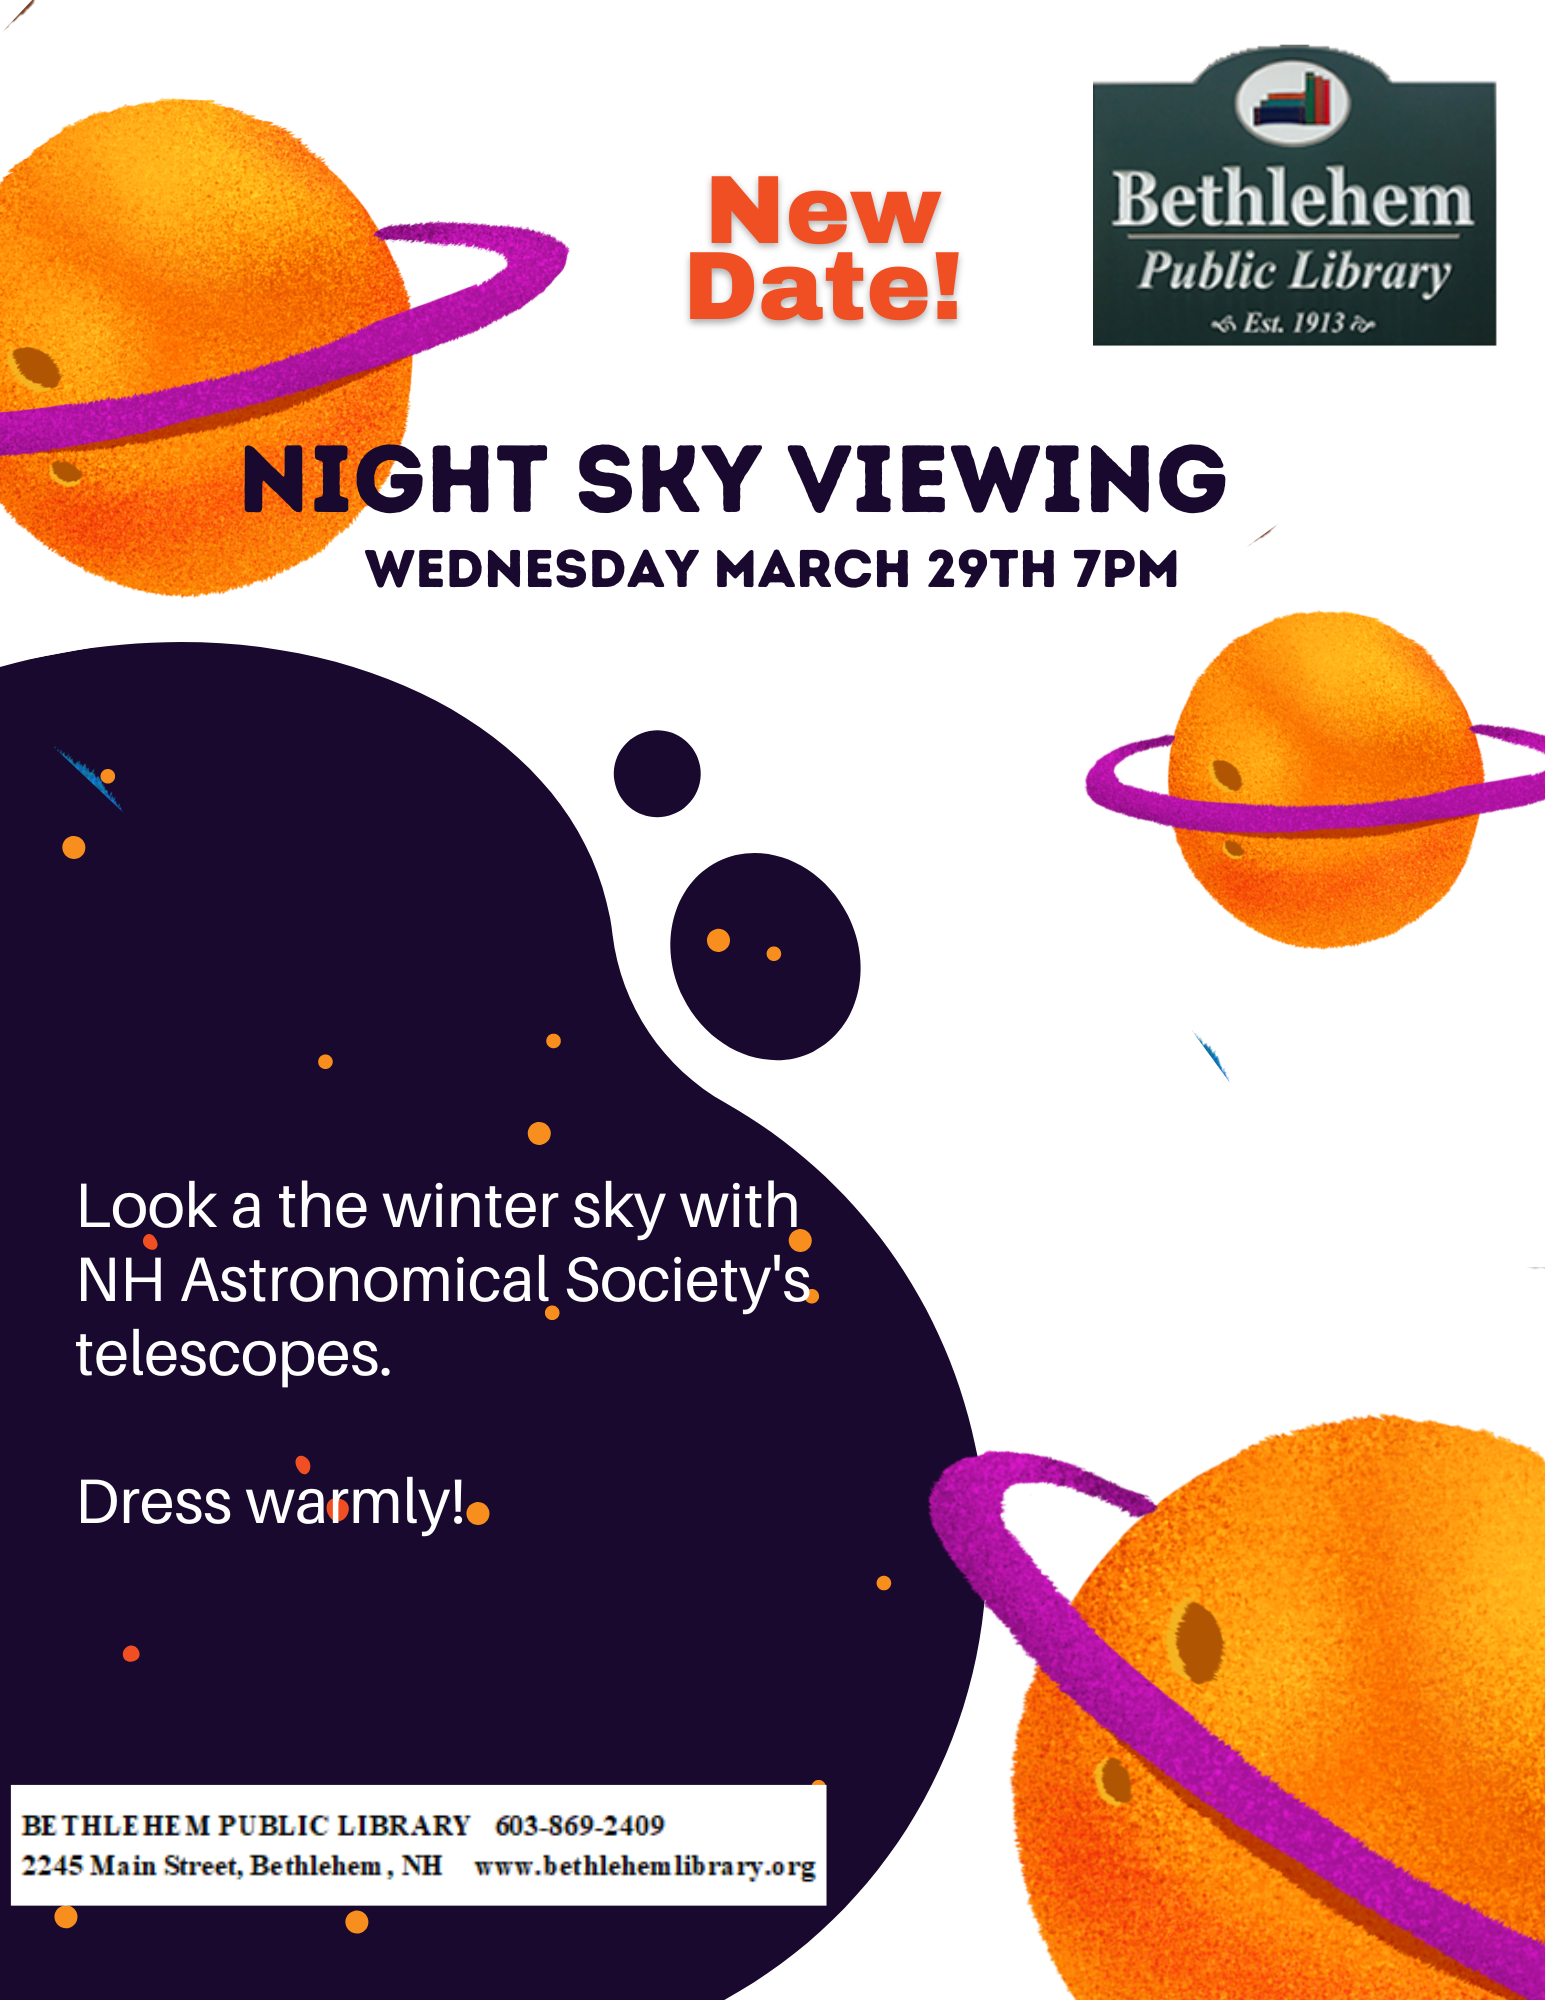 Night Sky Viewing Wednesday March 29th 7pm.  Look a the winter sky with NH Astronomical Society's telescopes.  Dress warmly!